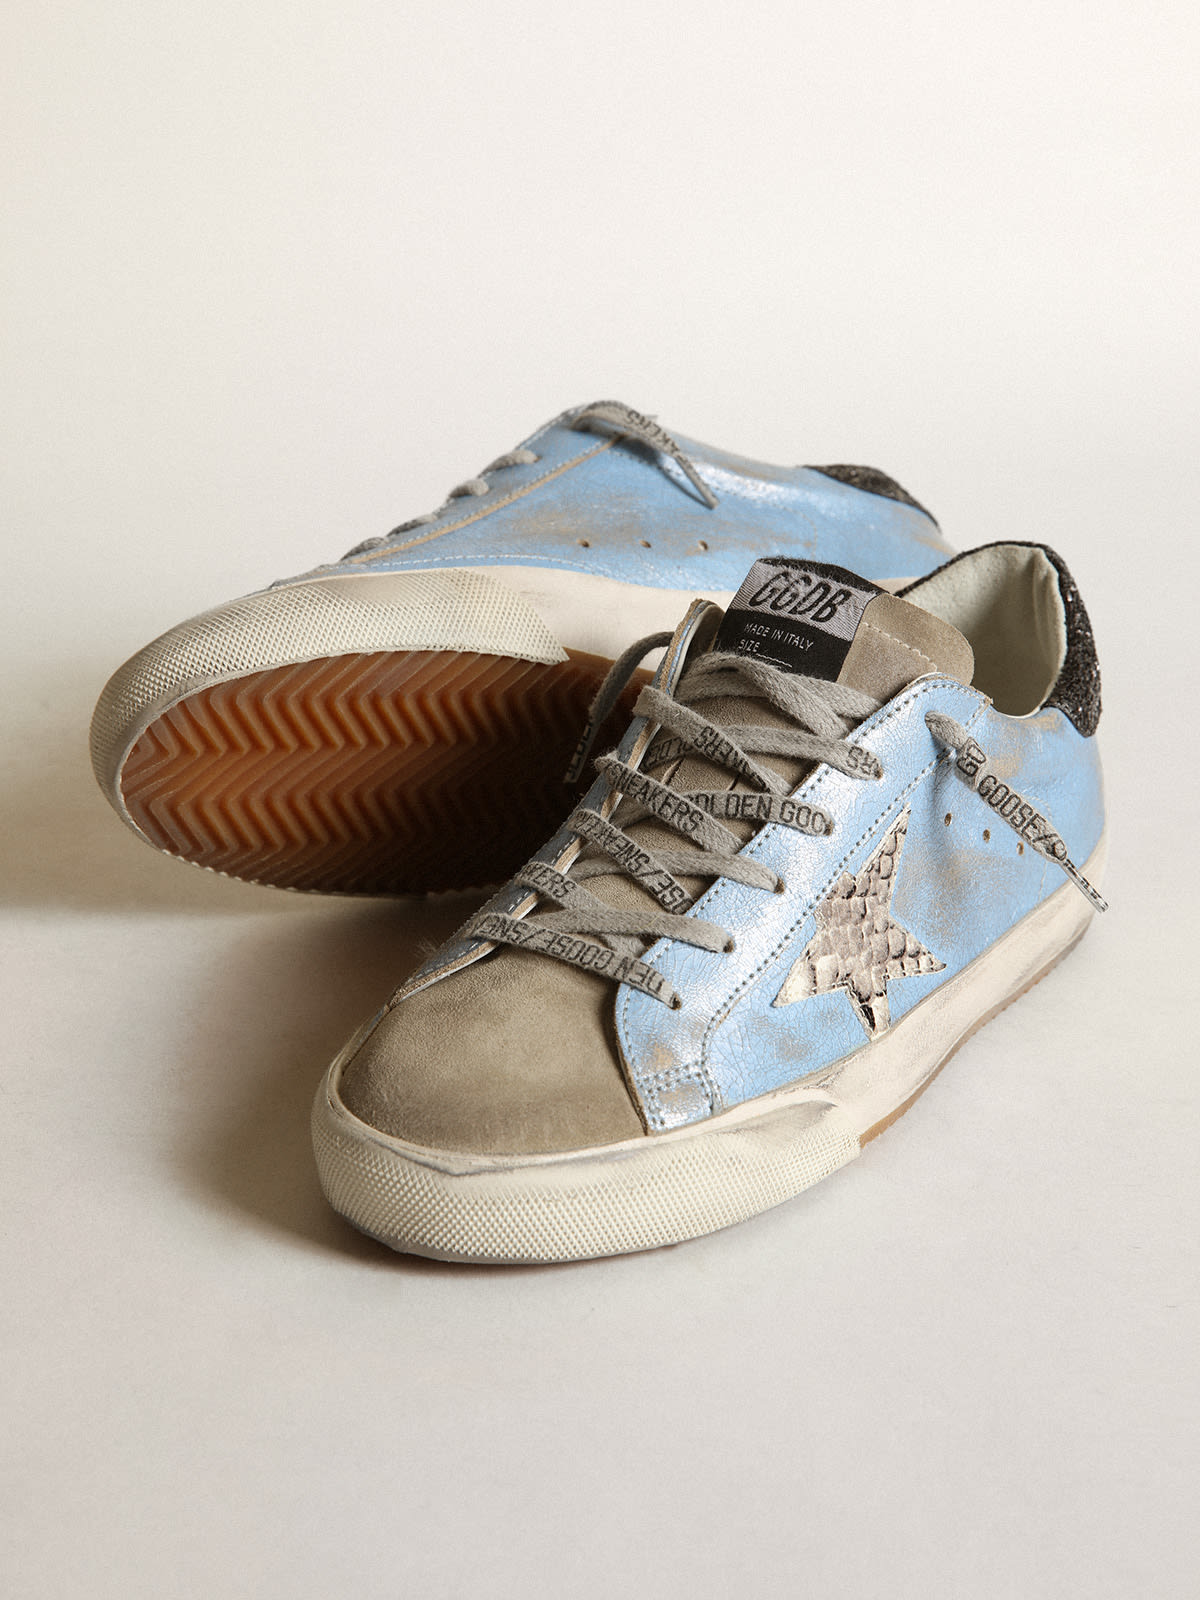 Golden Goose - Light blue Super-Star with a gray star and glitter heel tab in 